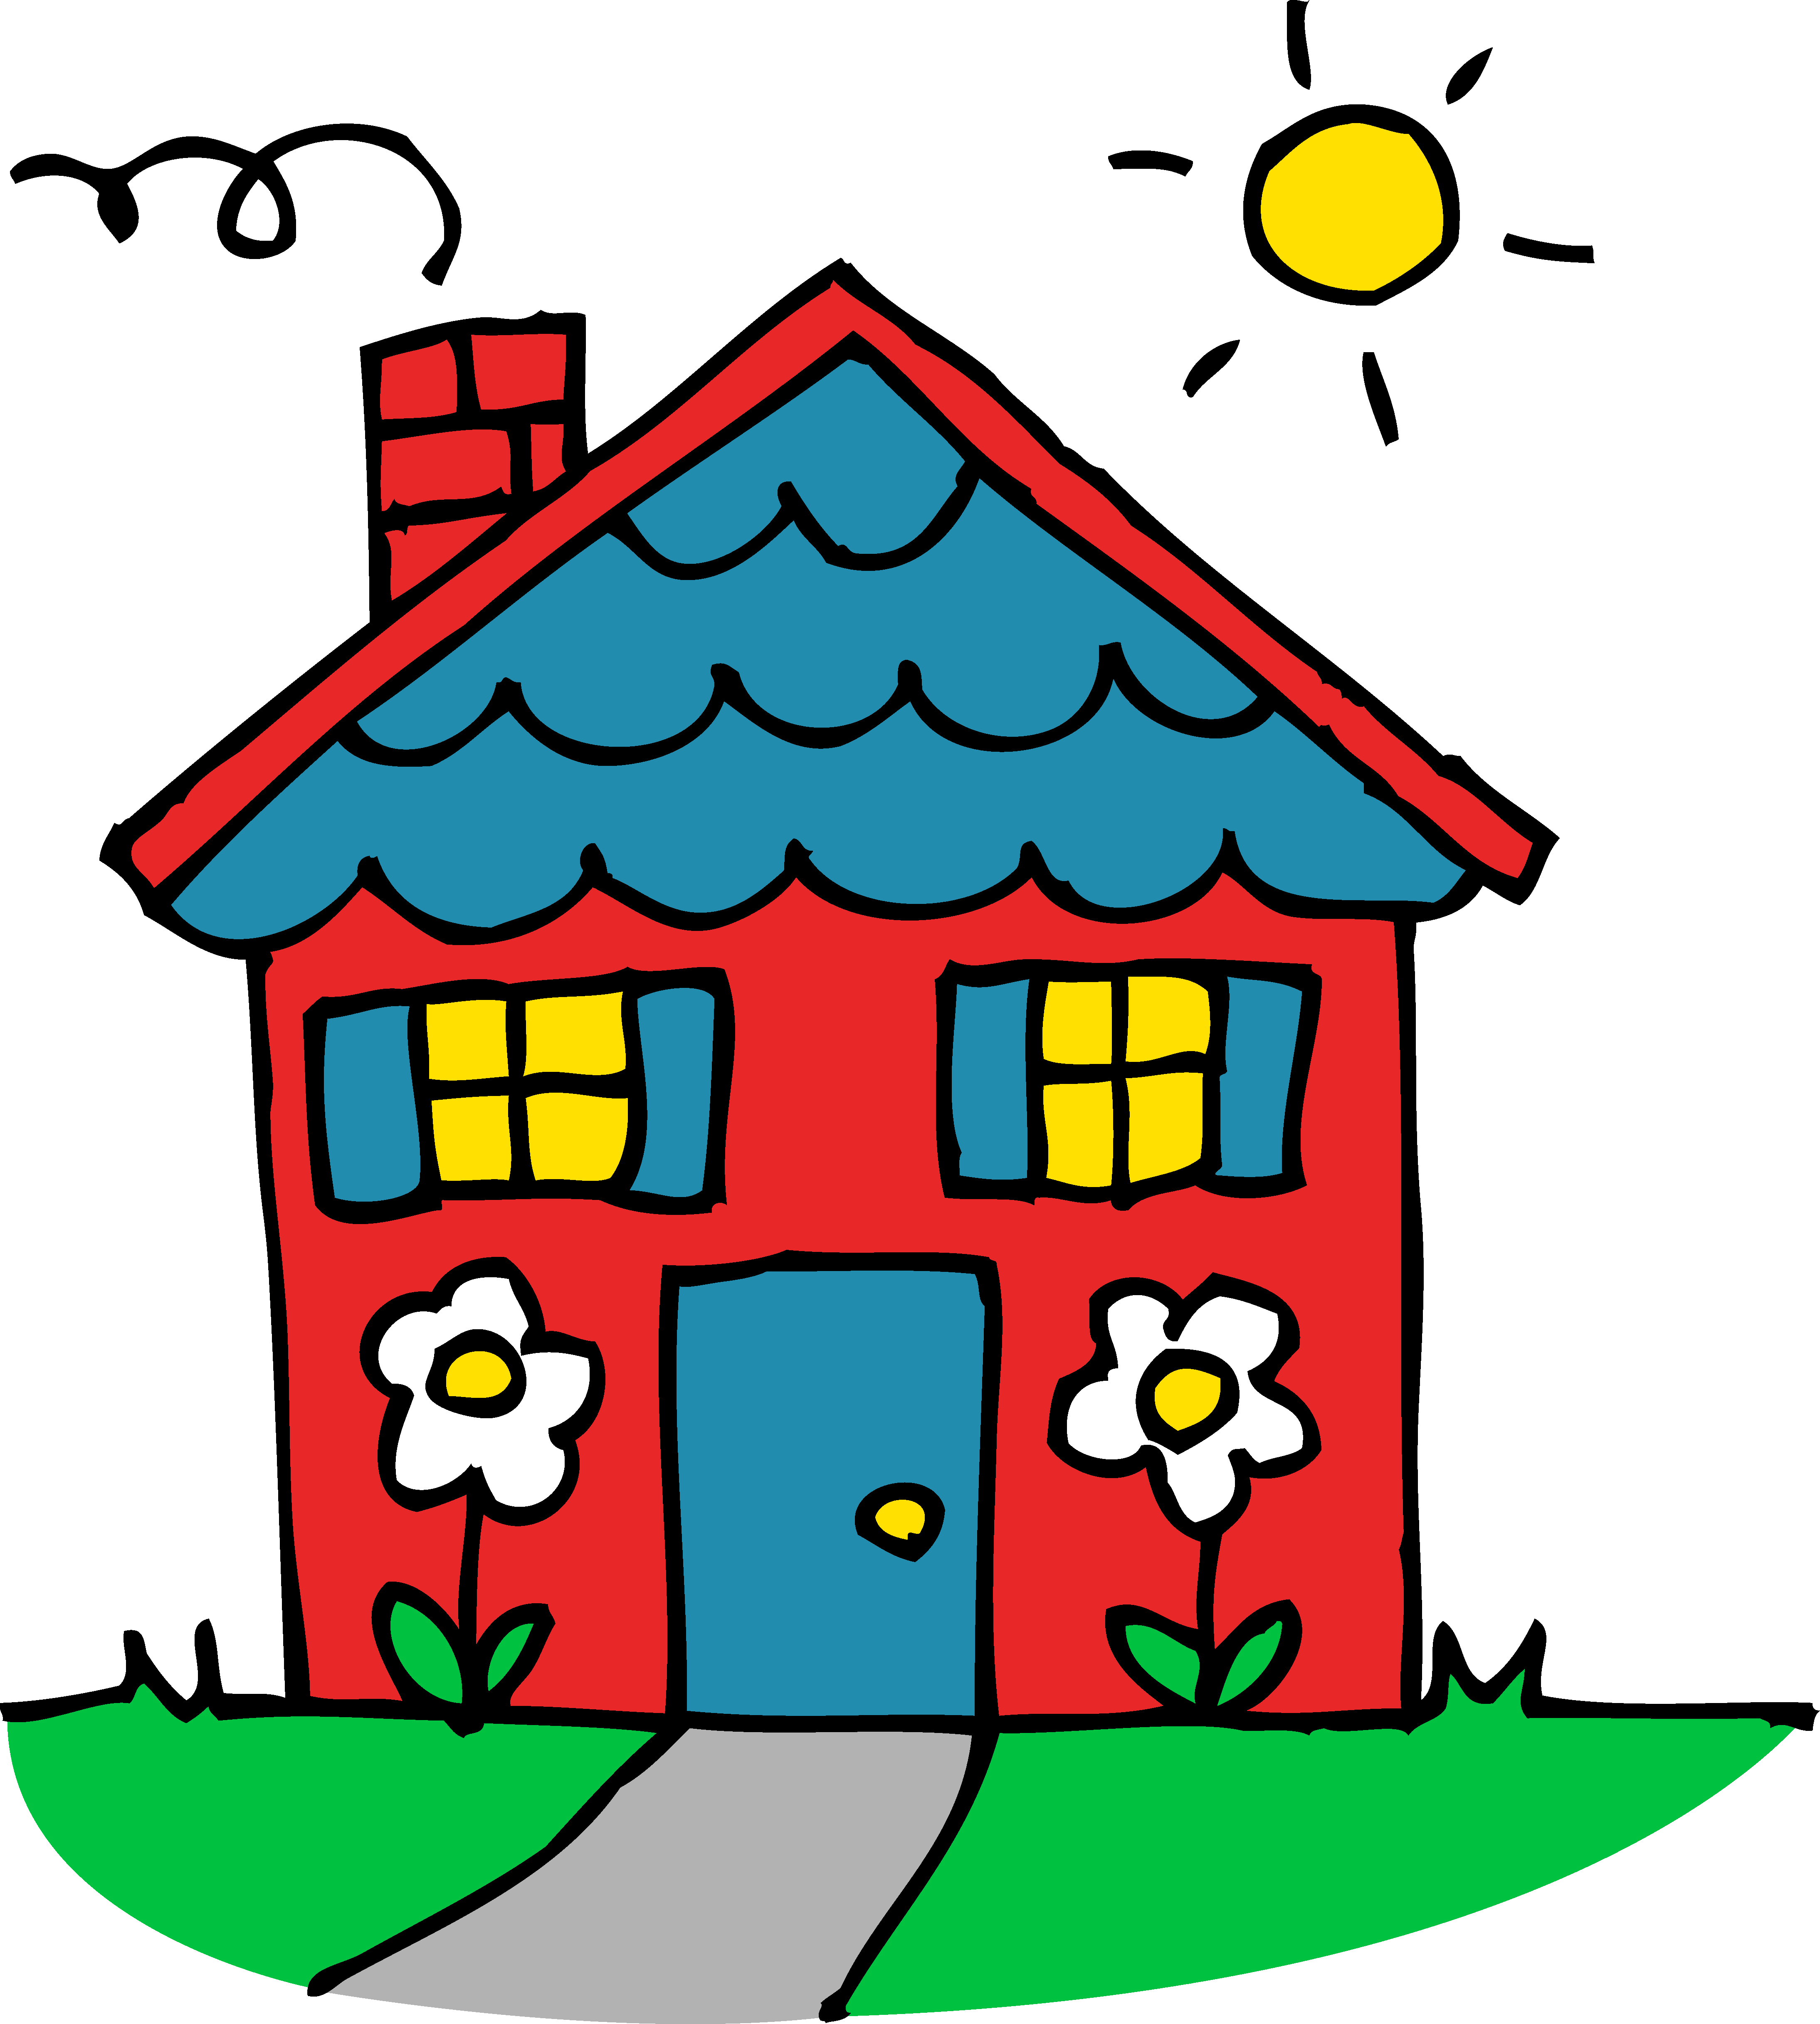 house clipart - House Image Clipart